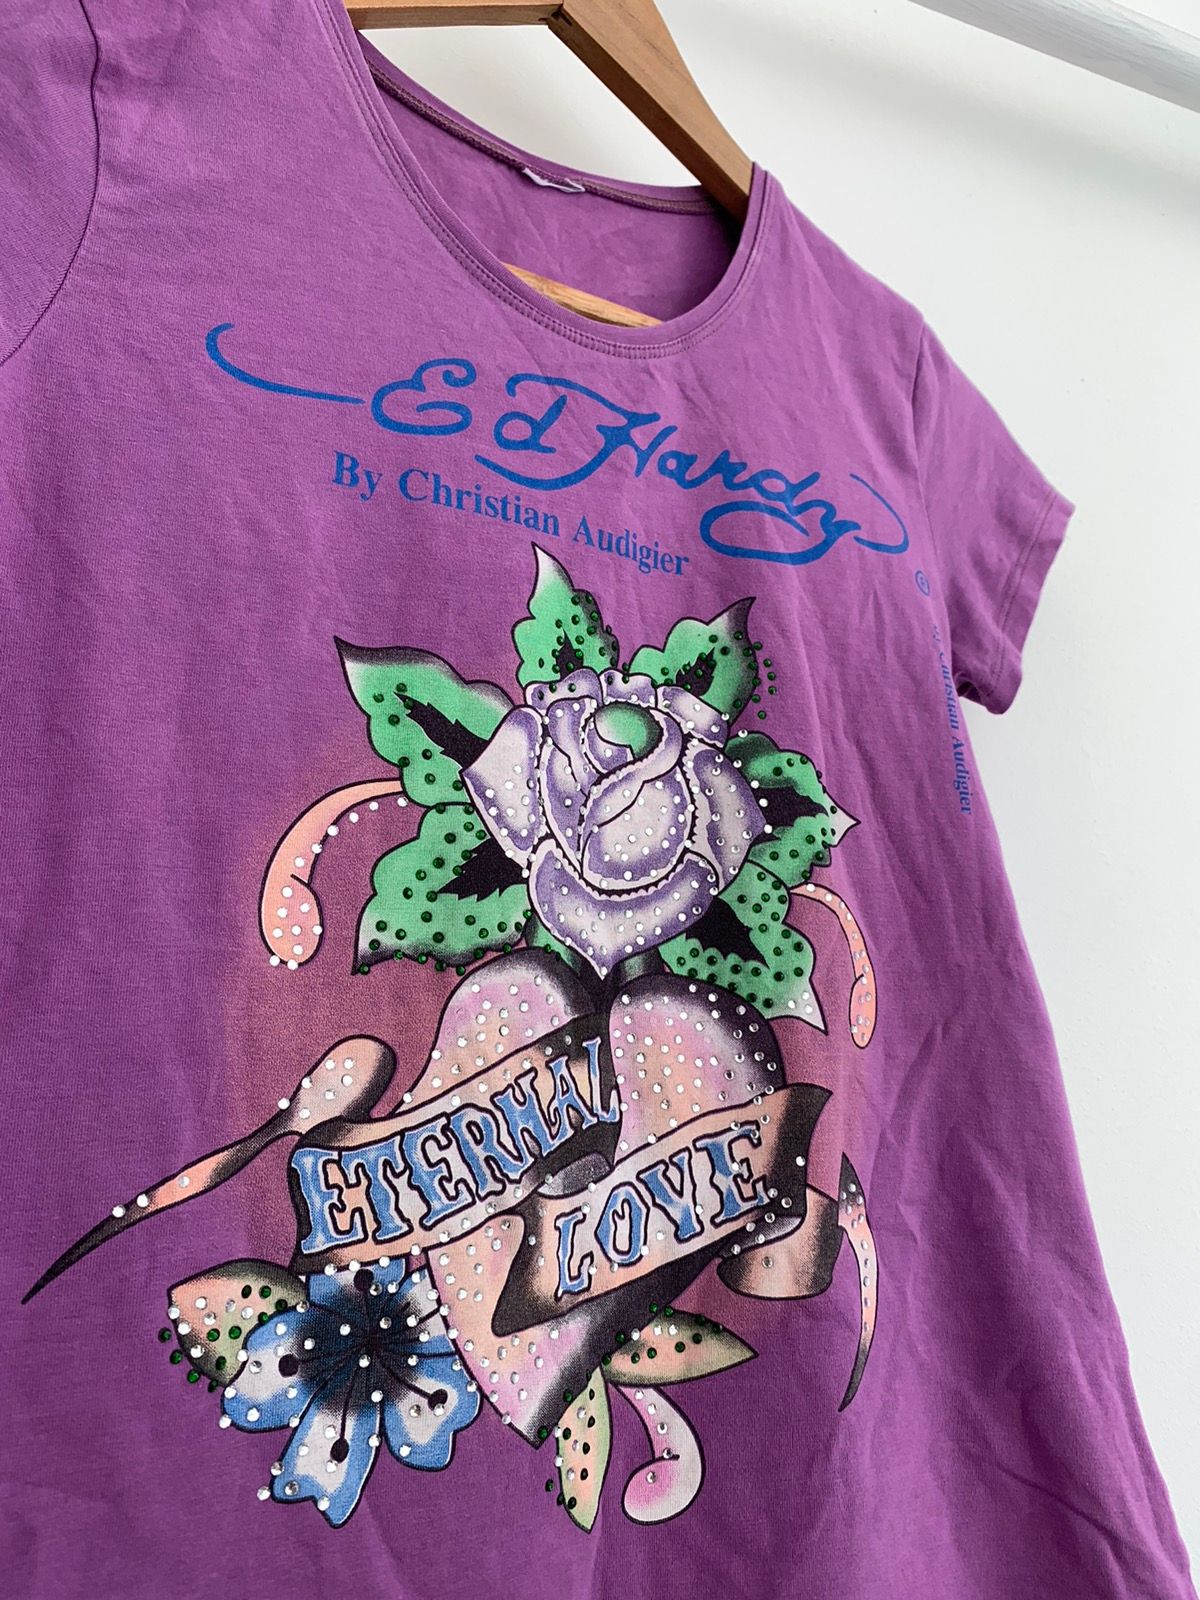 Ed Hardy Y2K Ed Hardy by Christian Audigier stretchy small top Size S / US 4 / IT 40 - 2 Preview